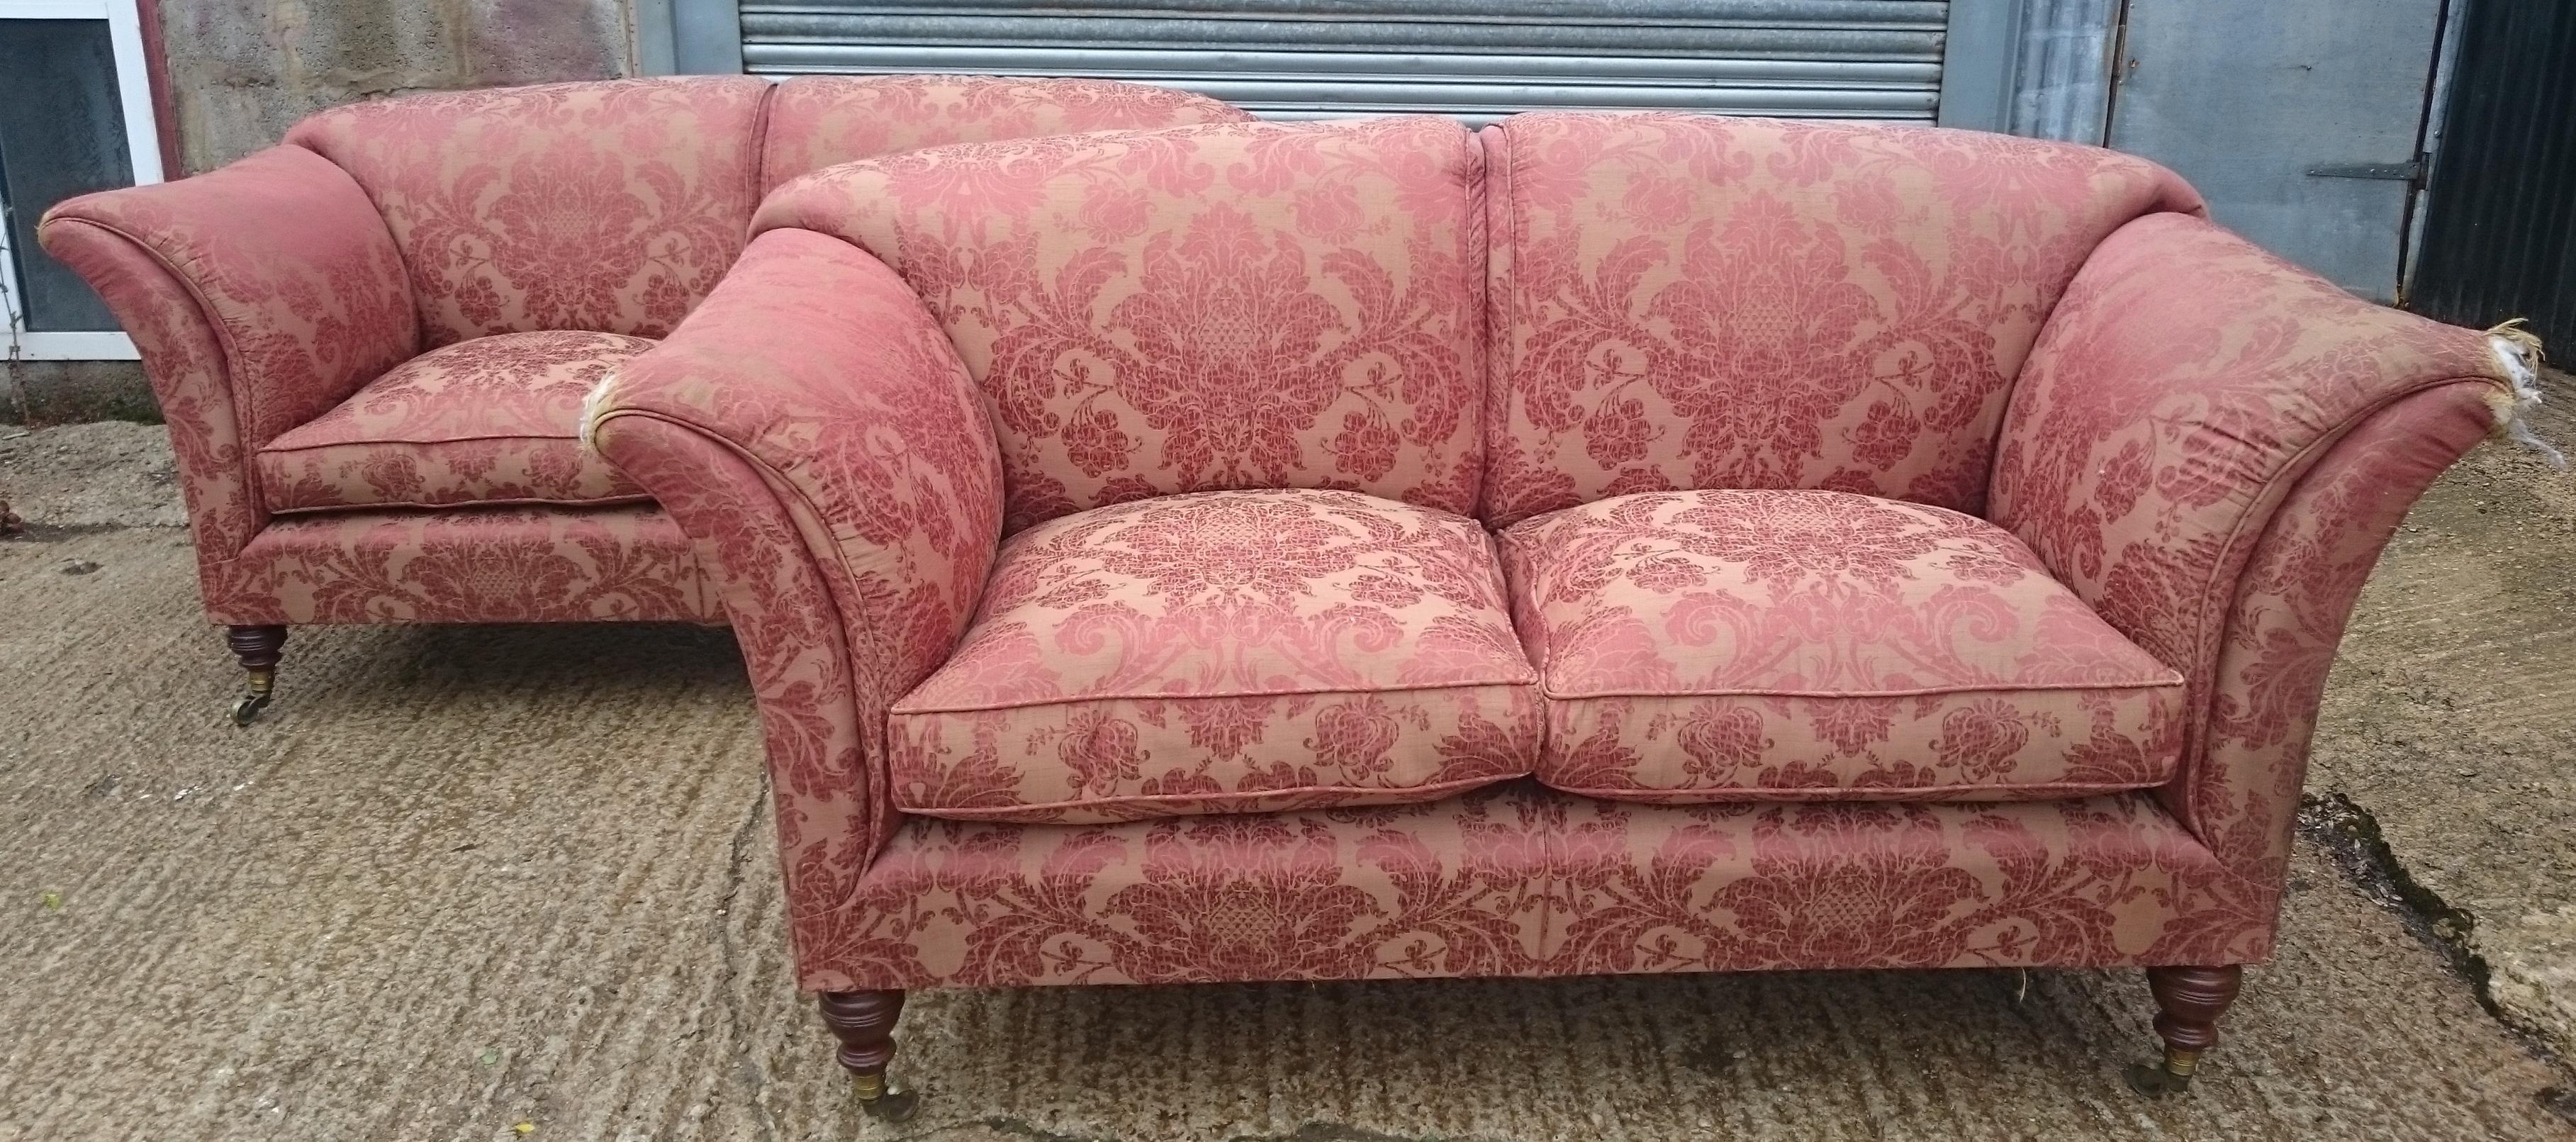 Antique Howard and Sons sofa, Grantley model. This sofa has high sides and back which is cosy in front of a fire. The high sides are sprung and have built in down cushions. This makes them supremely comfortable if sat on sideways with feet up. The